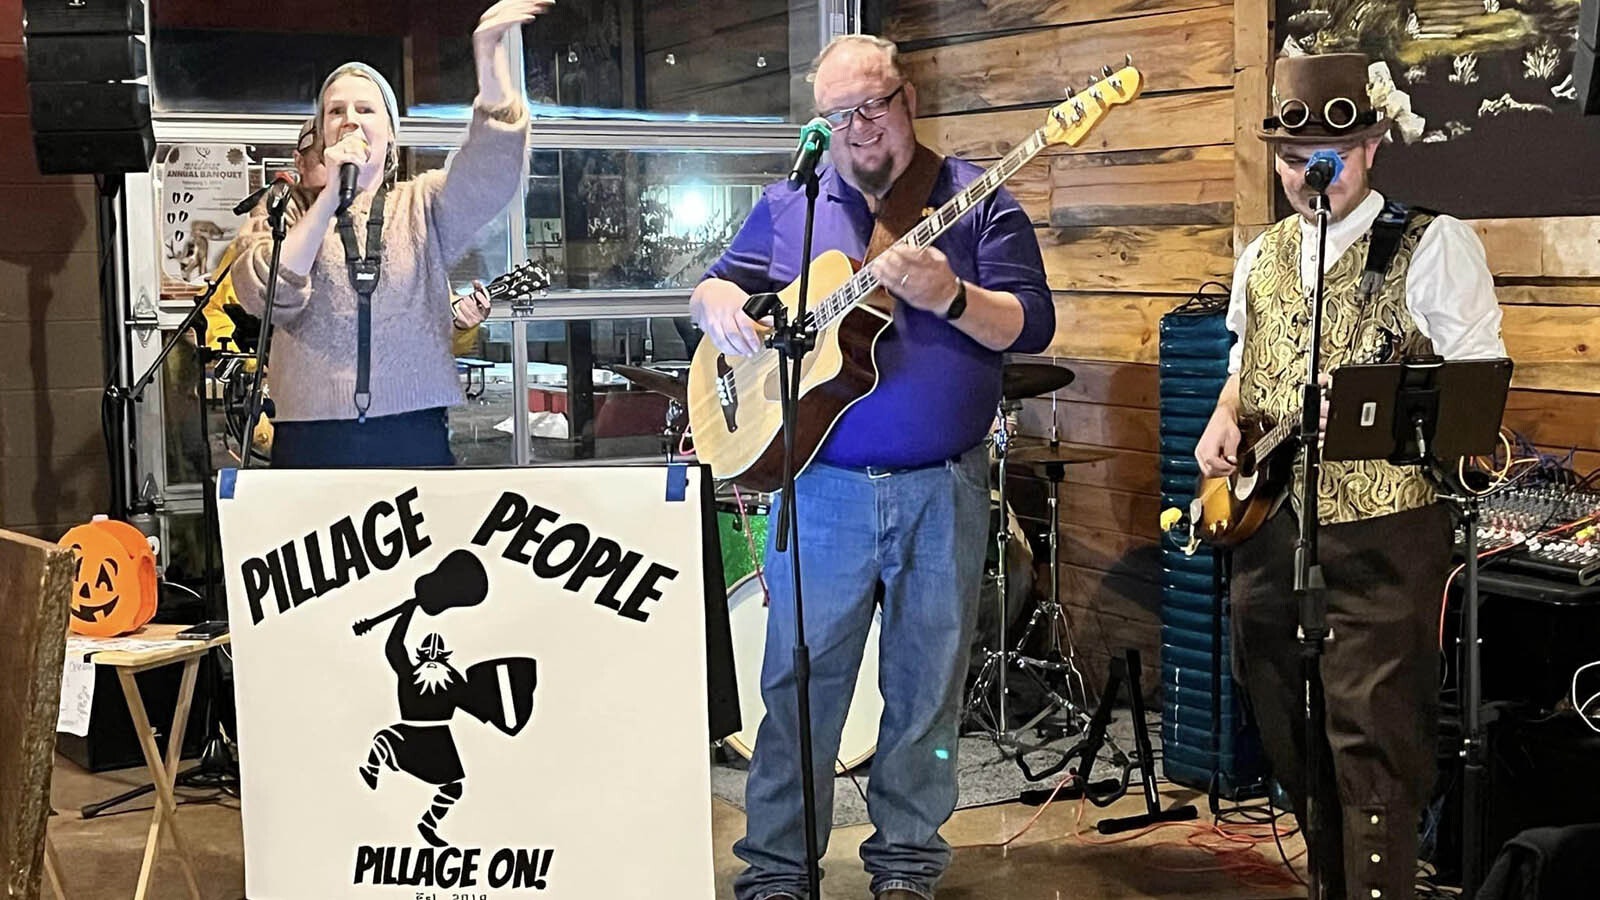 The Pillage People have become a popular Viking band in Gillette, Wyoming.